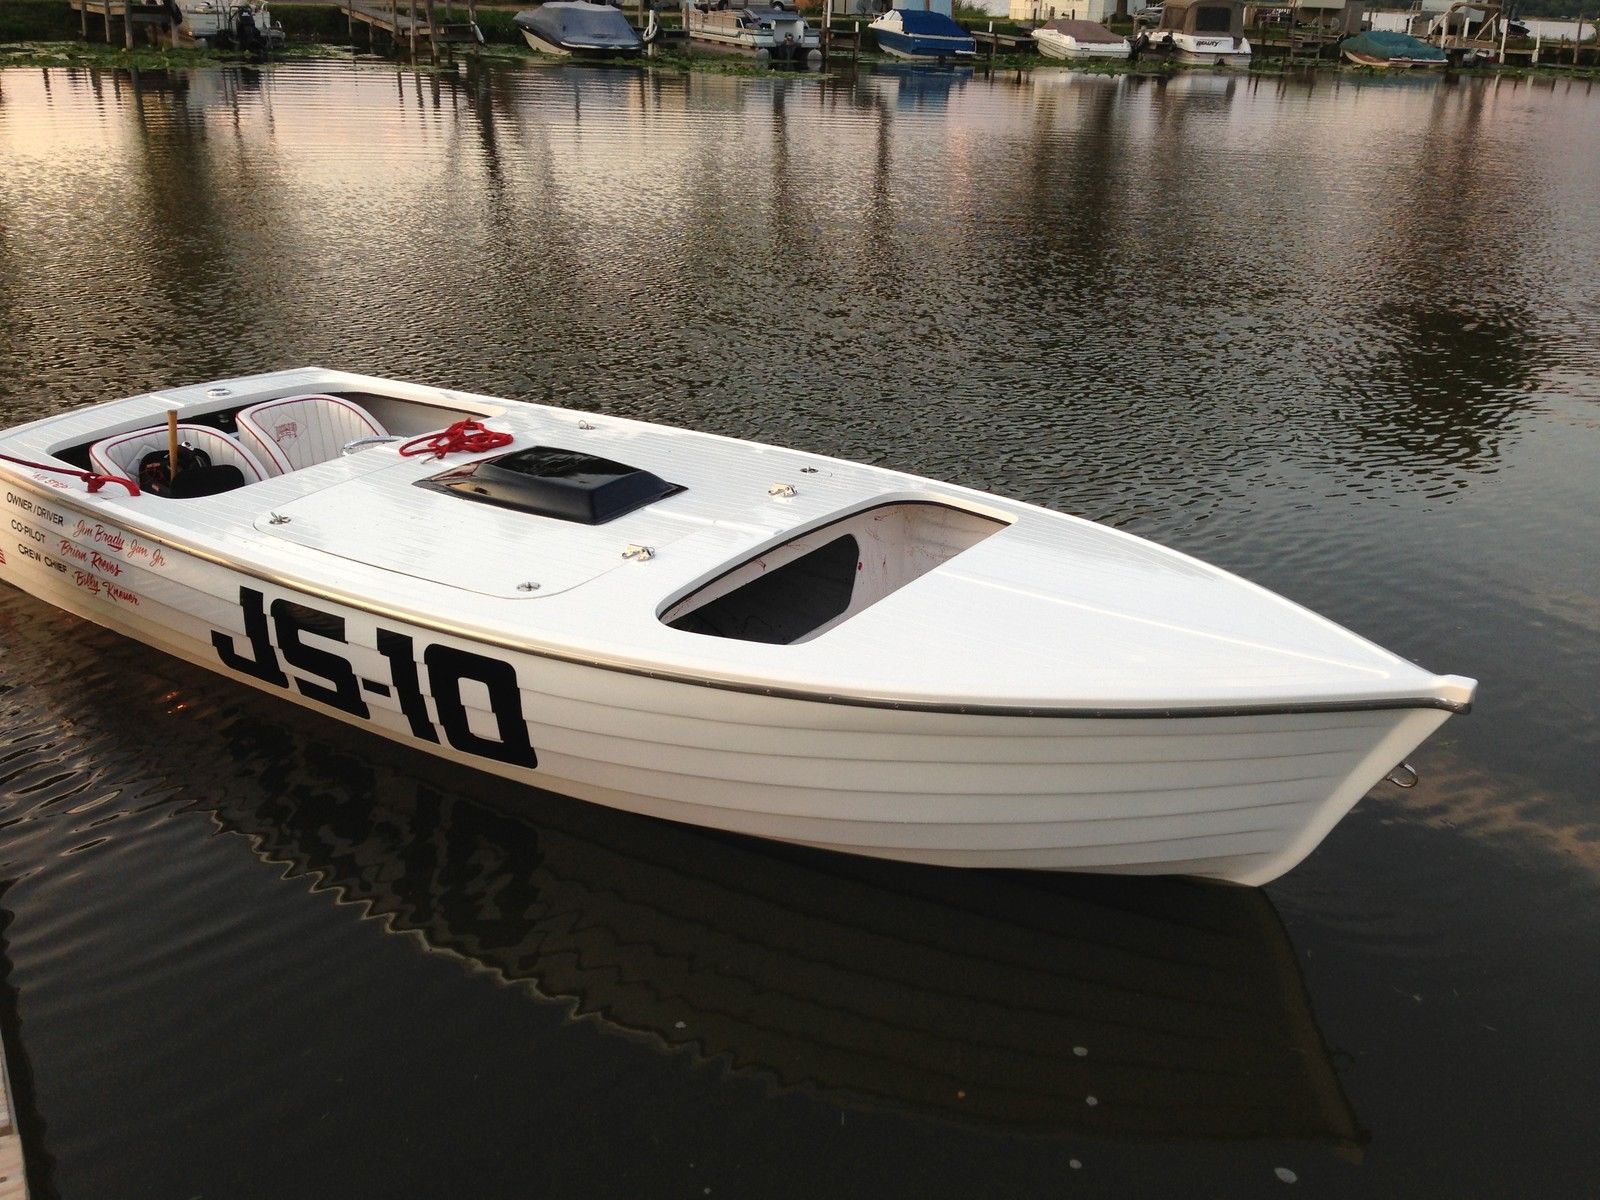 jersey speed skiff js-10 1972 for sale for $13,500 - boats